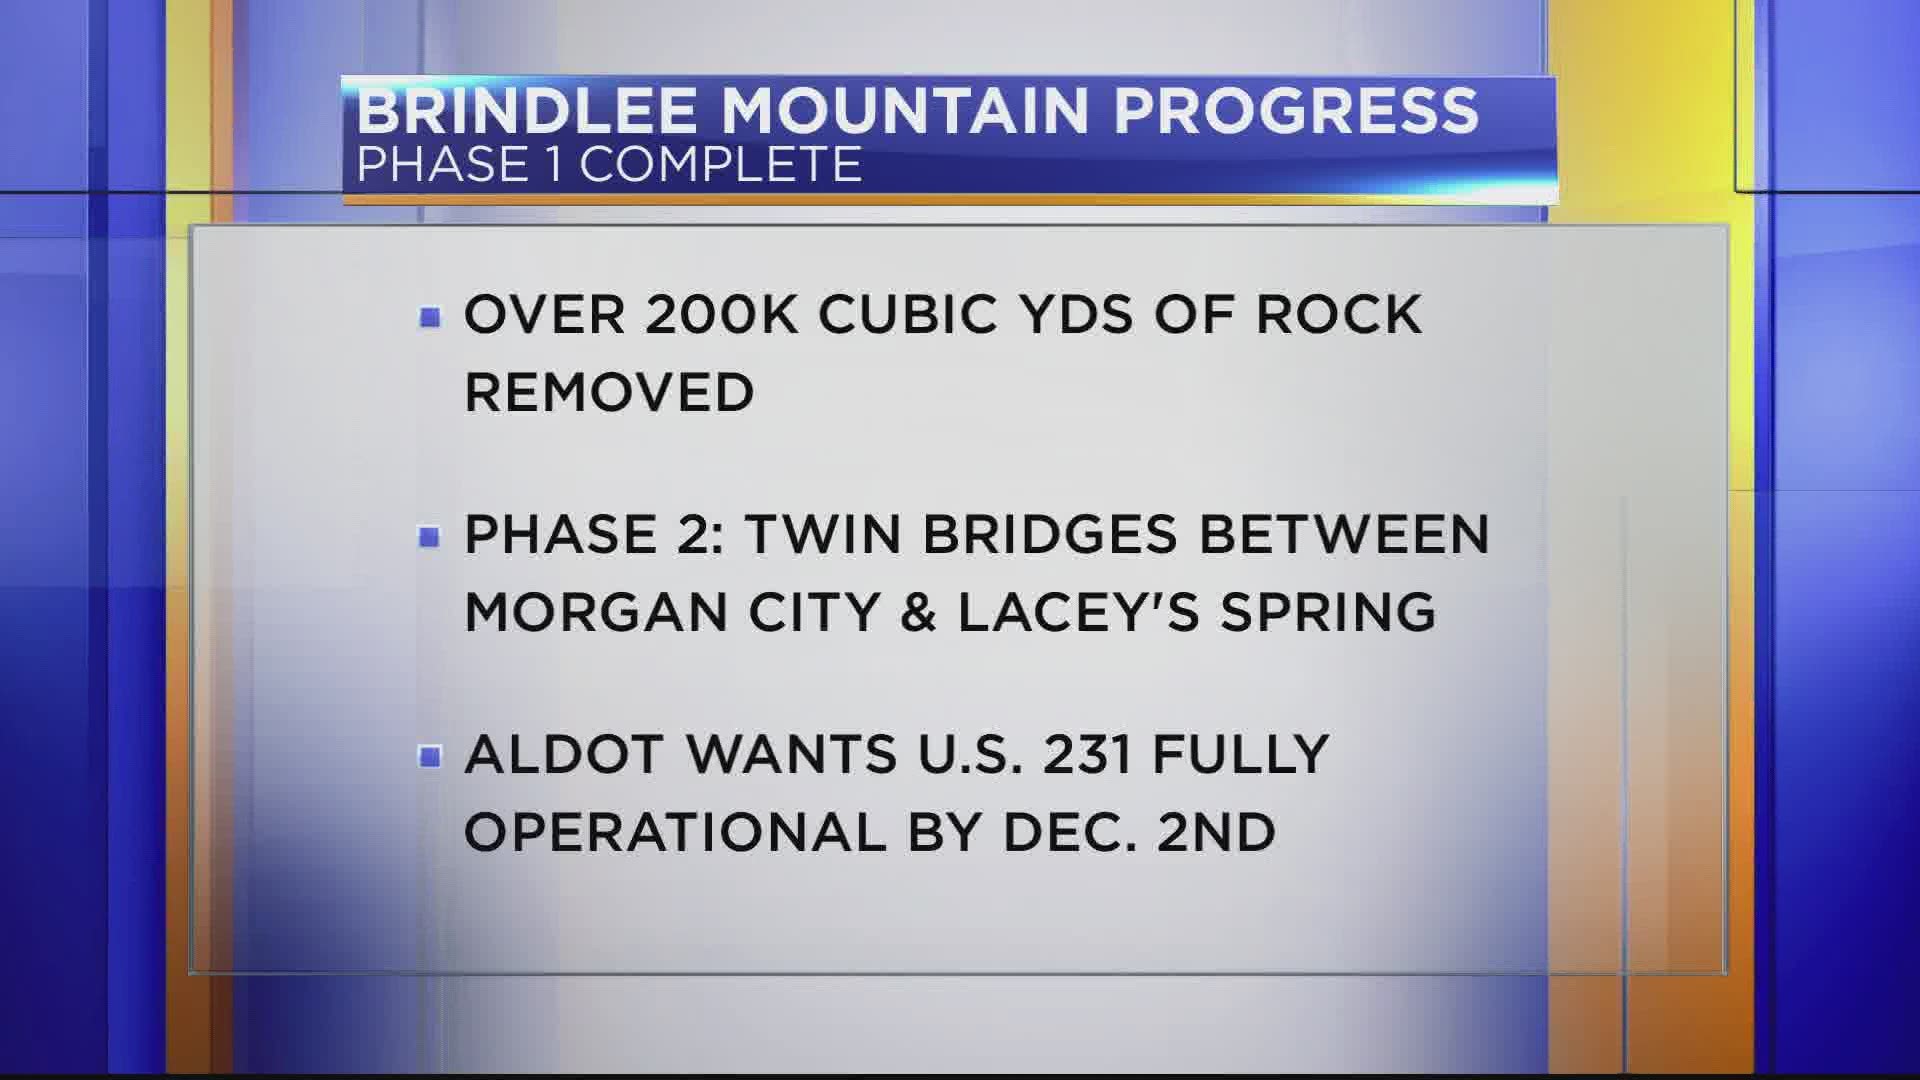 ALDOT's goal is to complete the bridge and fully reopen the closed section of Highway 231 before December 2.